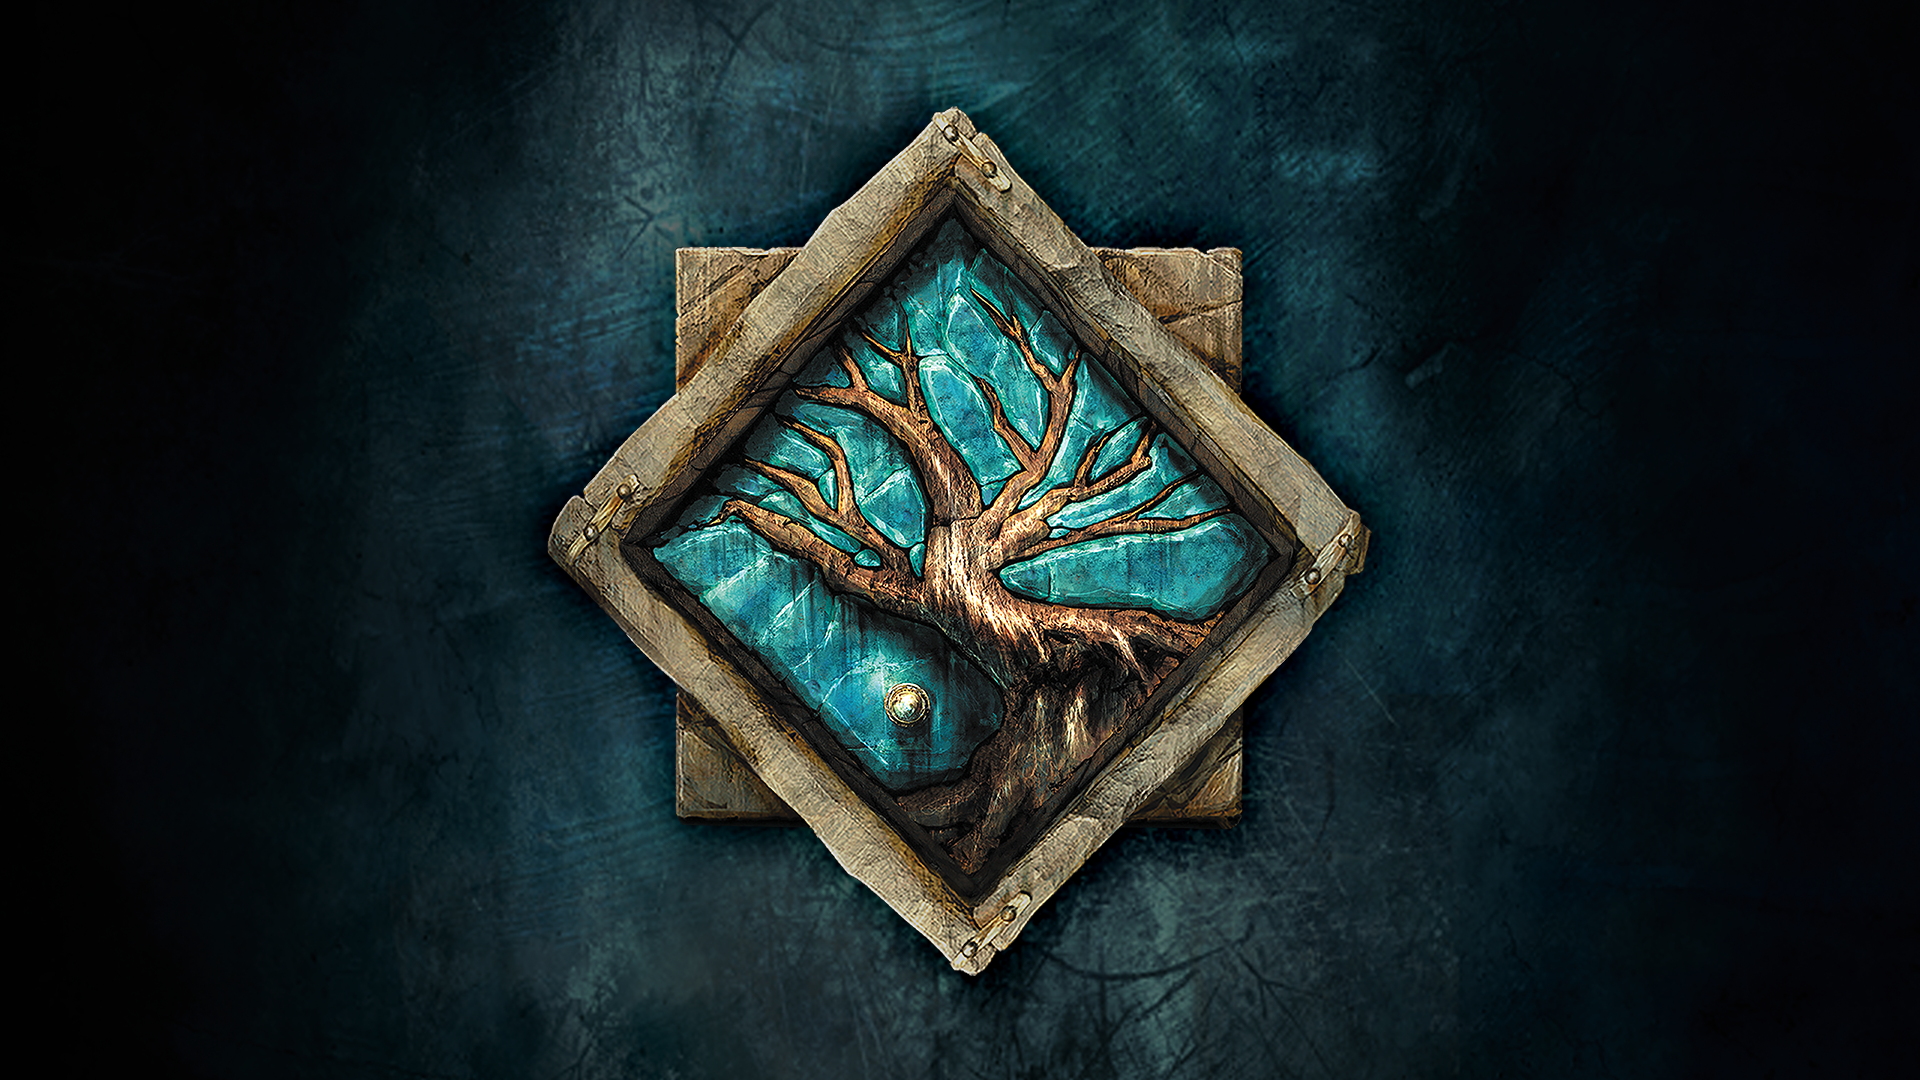 Icon for Cold Fury